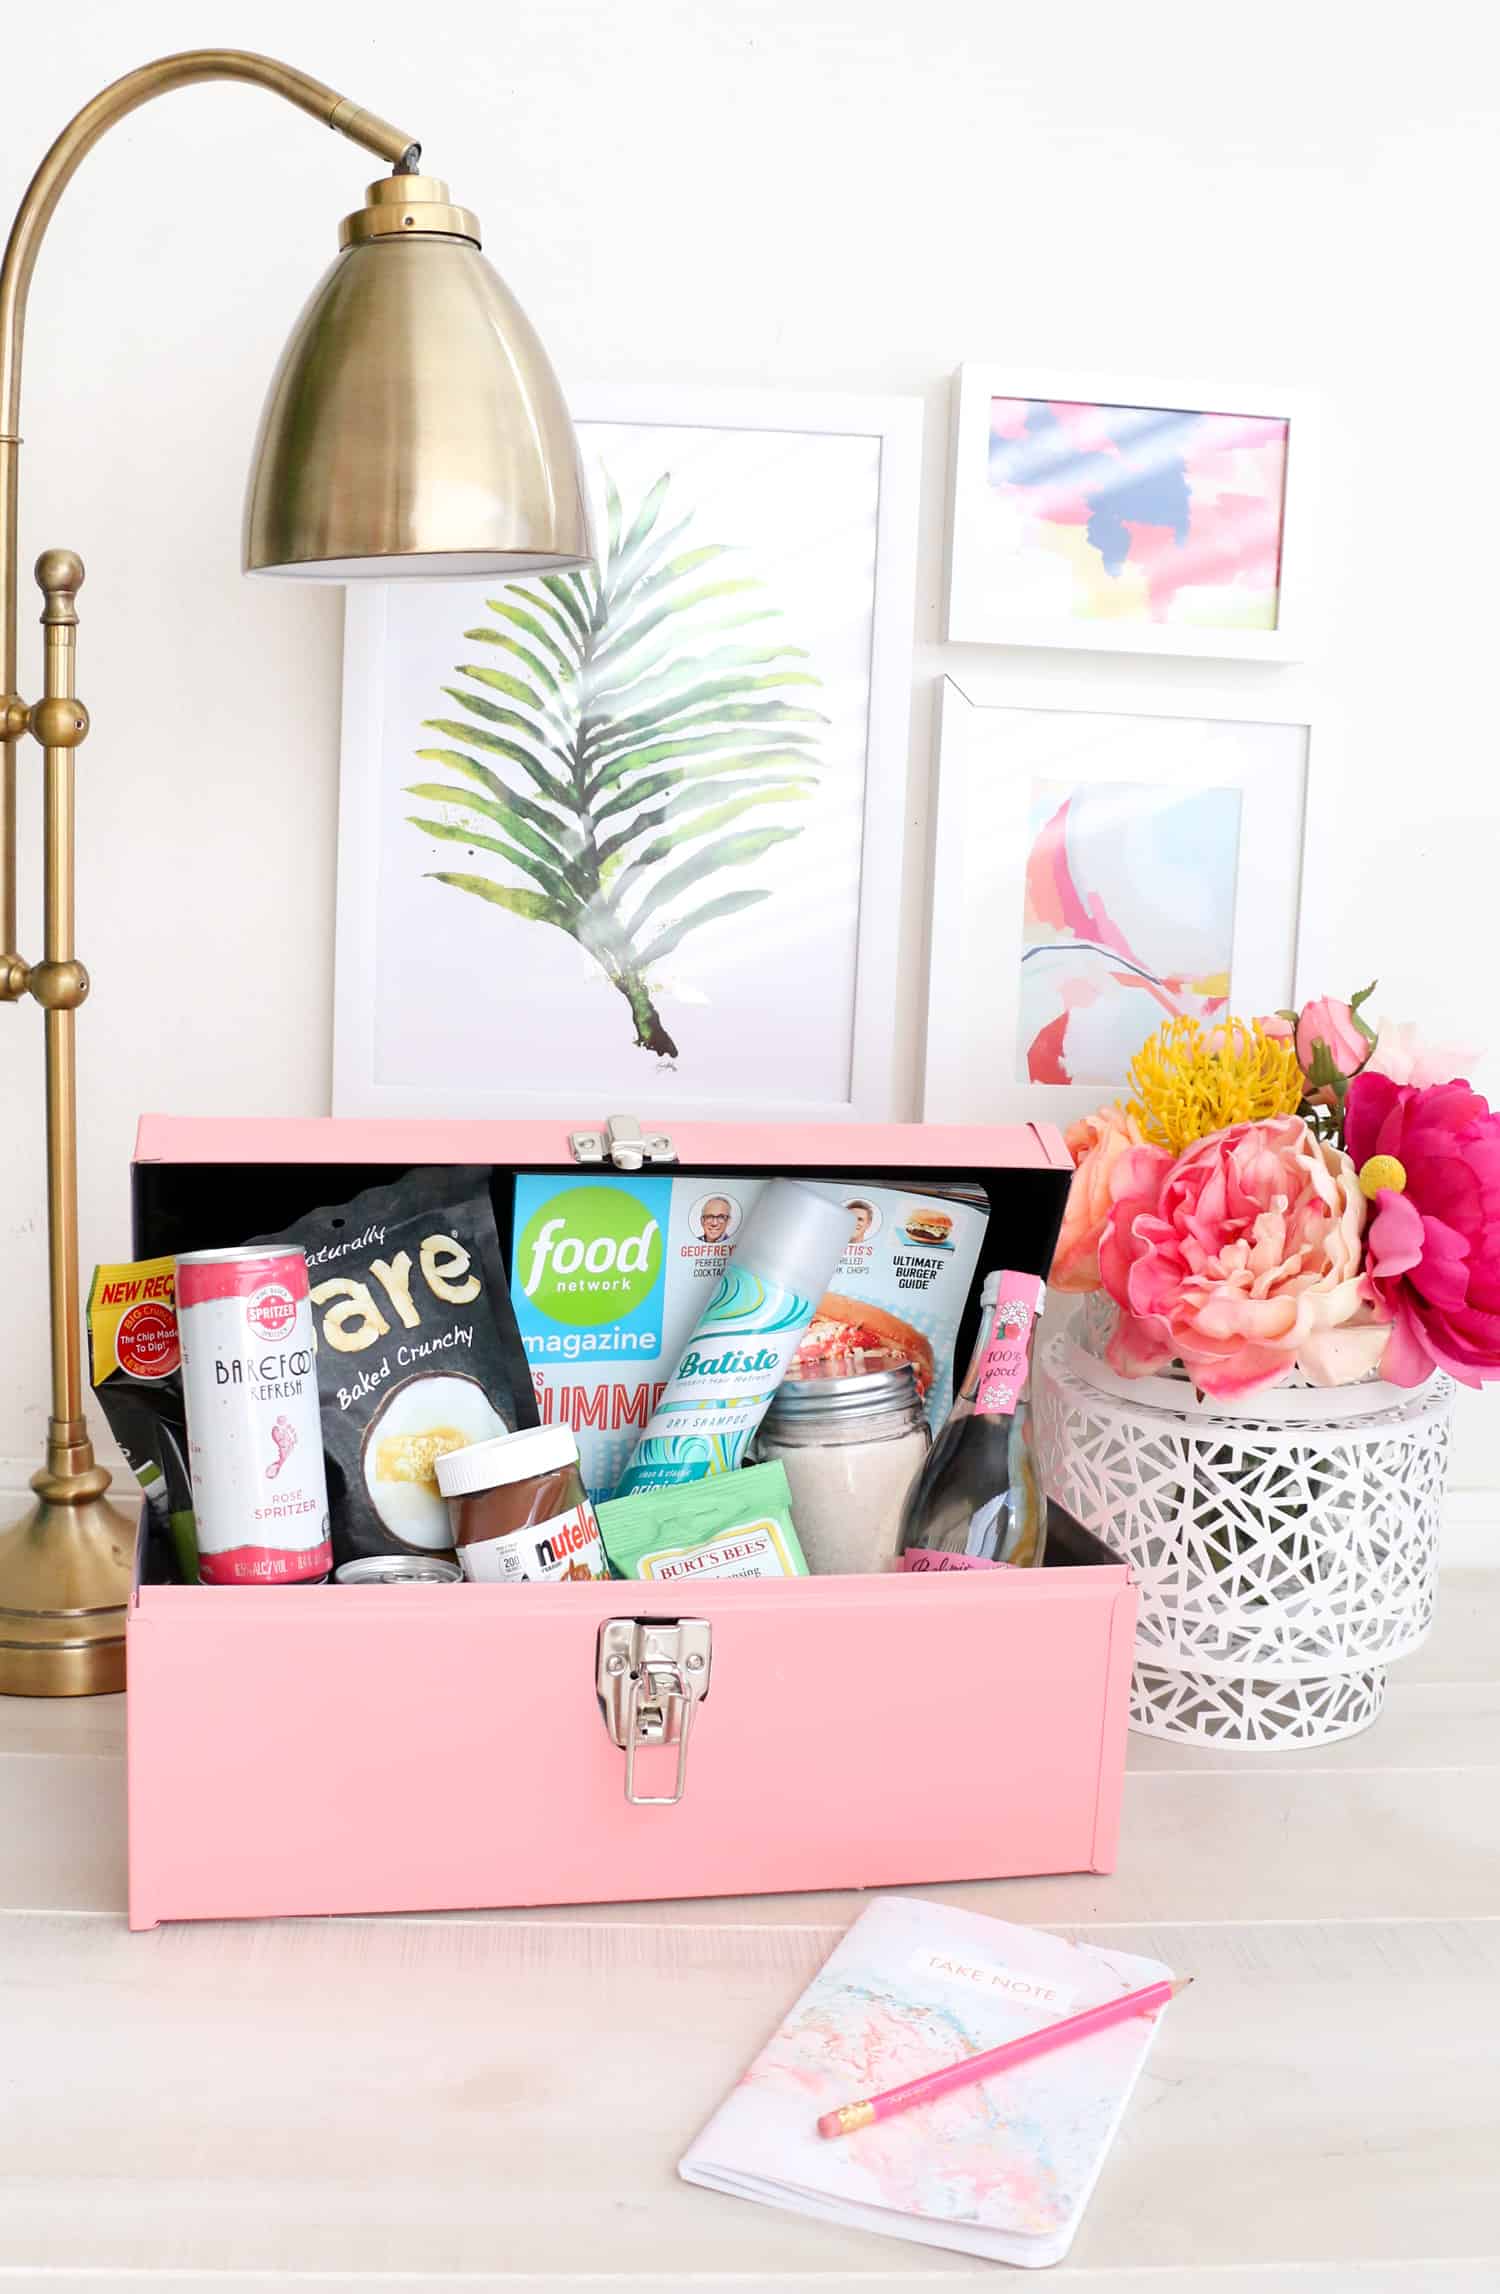 Make Your Own Guest Room Mini Bar - A Beautiful Mess